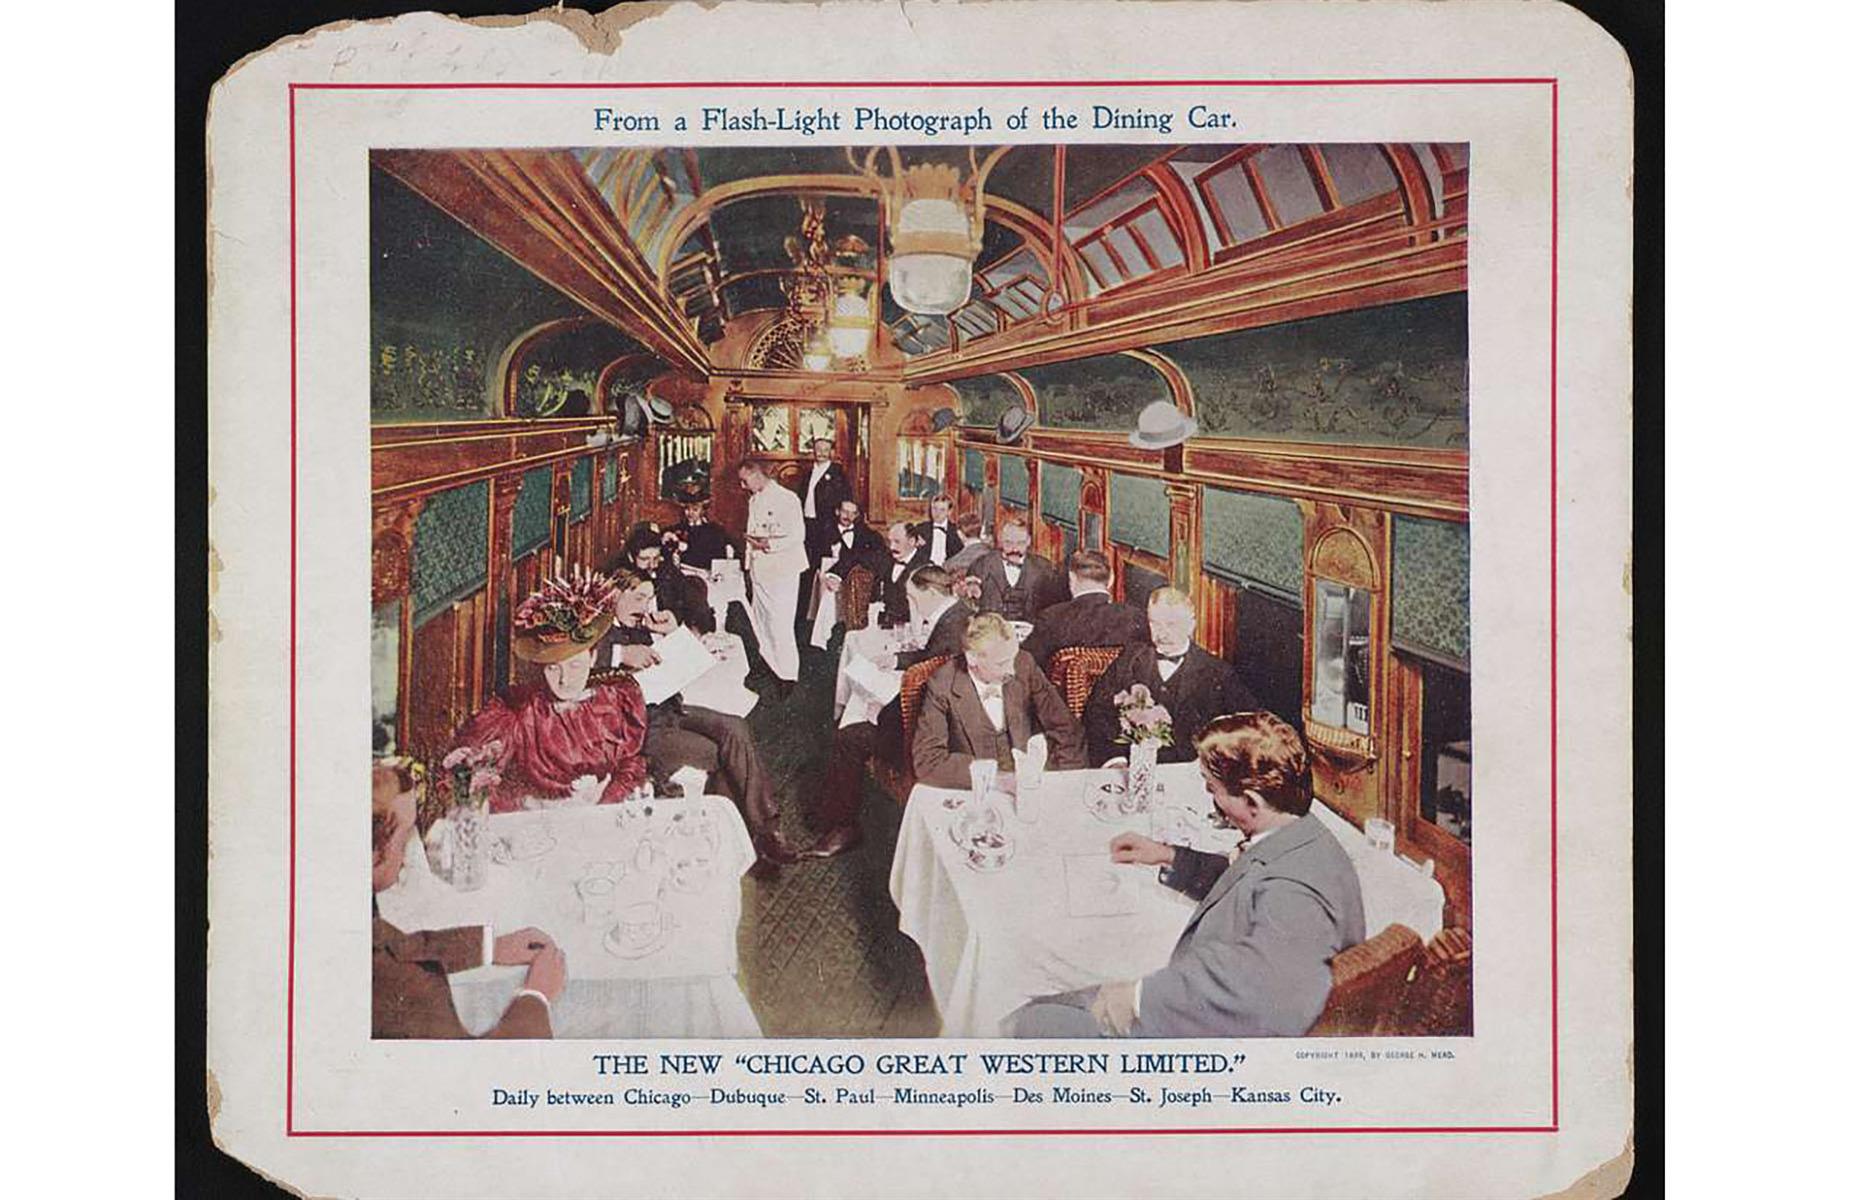 <p>Chicago Great Western Railway was a relatively small railroad chain, its routes mostly connecting Chicago and the Twin Cities. What it lacked in size though, it made up for in elegance and glamour. The daily Great Western Limited trains connecting Chicago and Kansas City didn't skimp on lavishness either, as seen in this photograph of the dining car, captured in 1899. Dedicated dining cars were already a normal part of long-distance trains by the mid-1880s.</p>